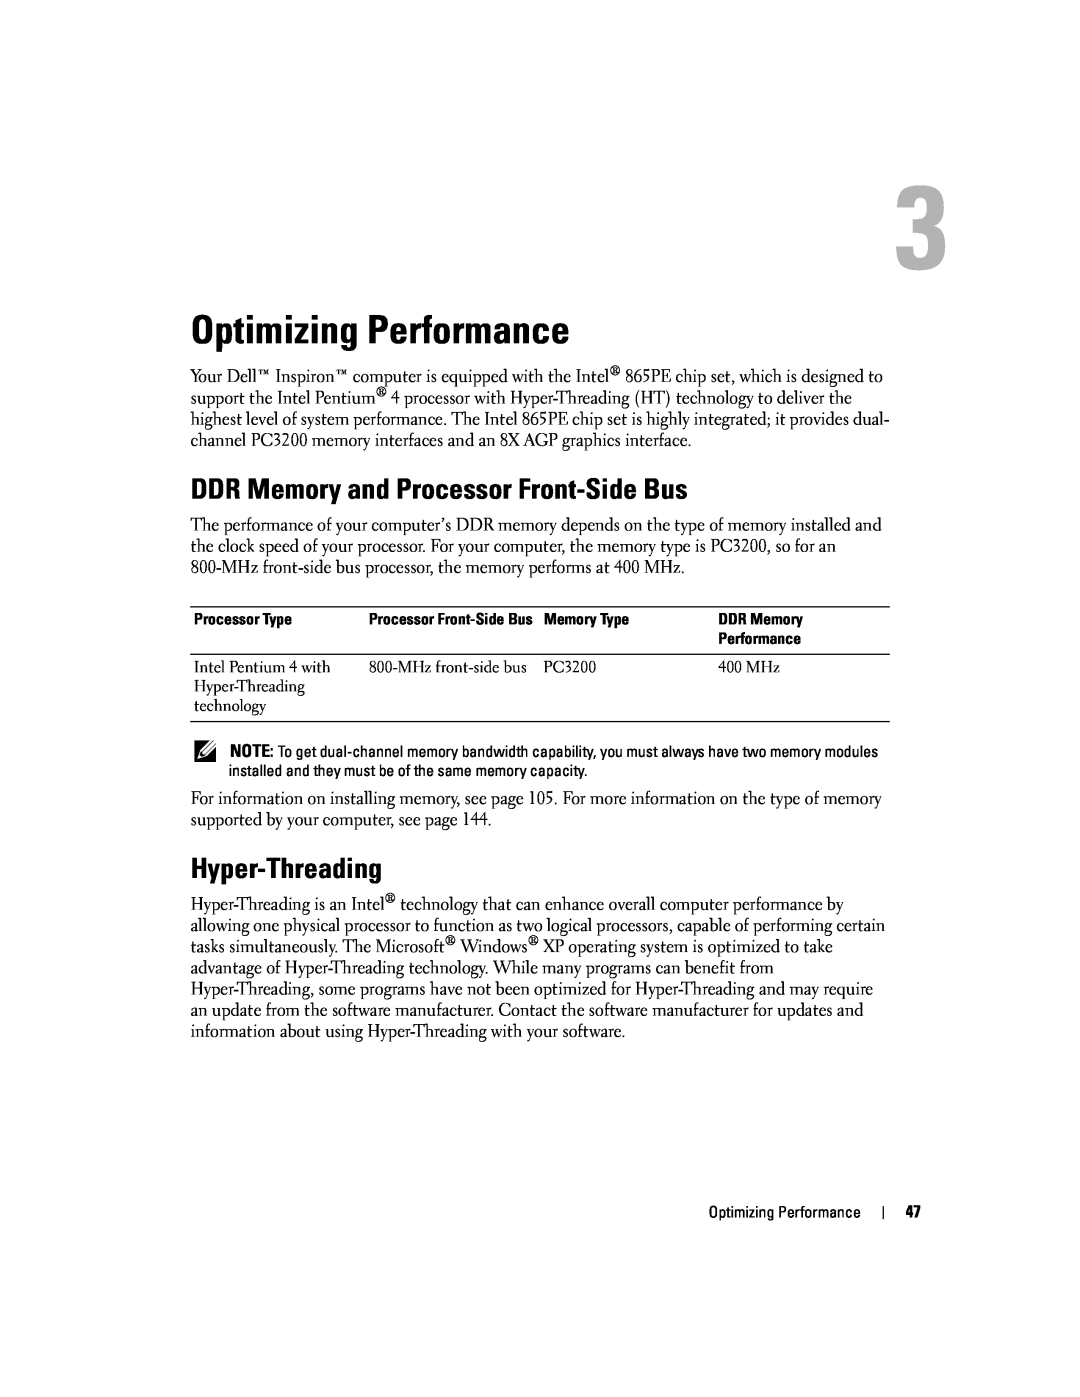 Dell PP09L owner manual Optimizing Performance, DDR Memory and Processor Front-Side Bus, Hyper-Threading 